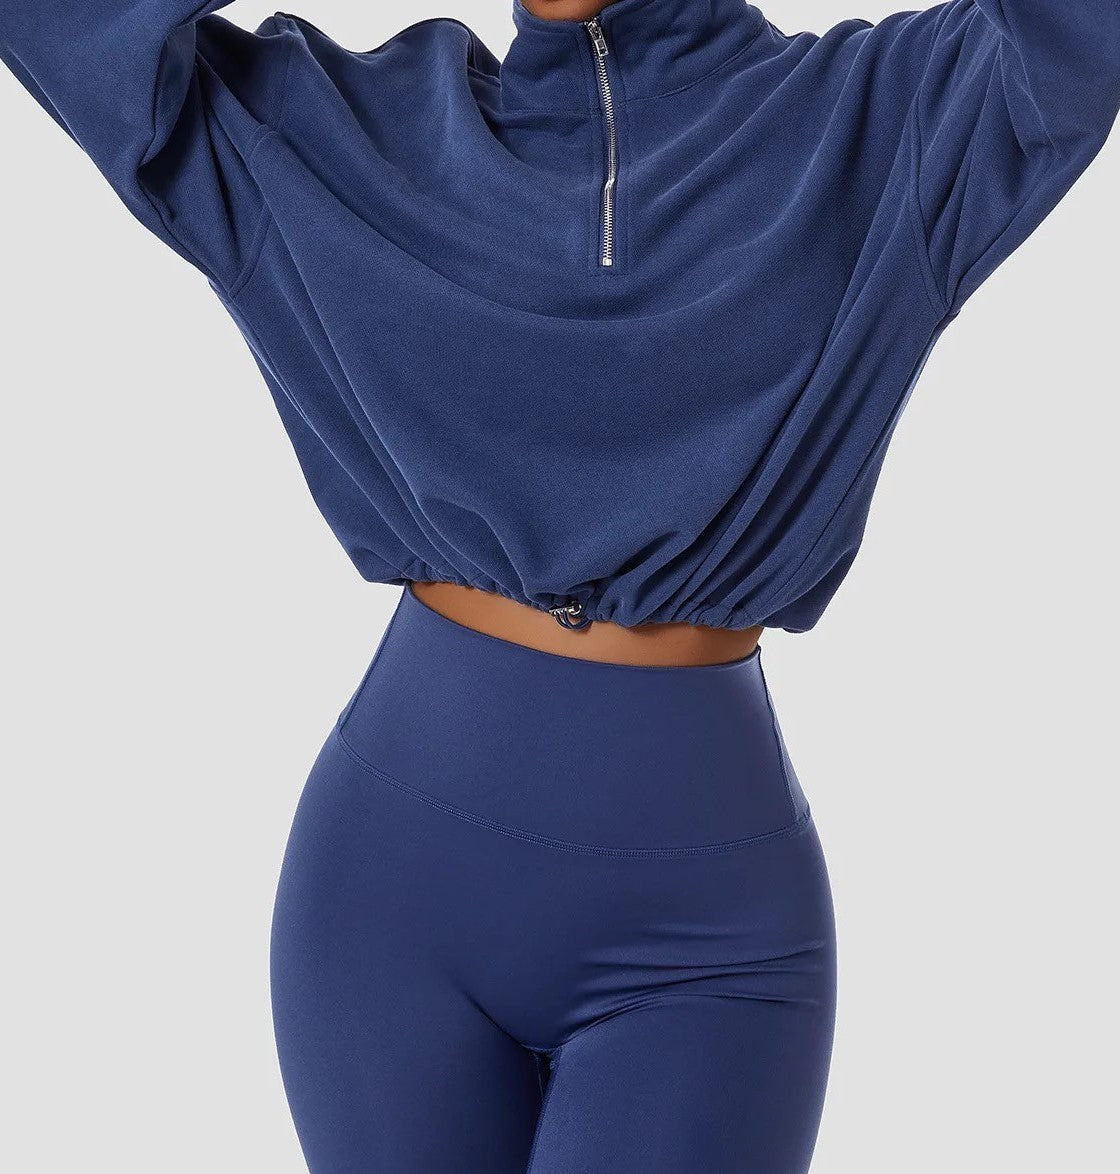 GymBabe Three Piece Set in Dark Blue (Made with recycled material)